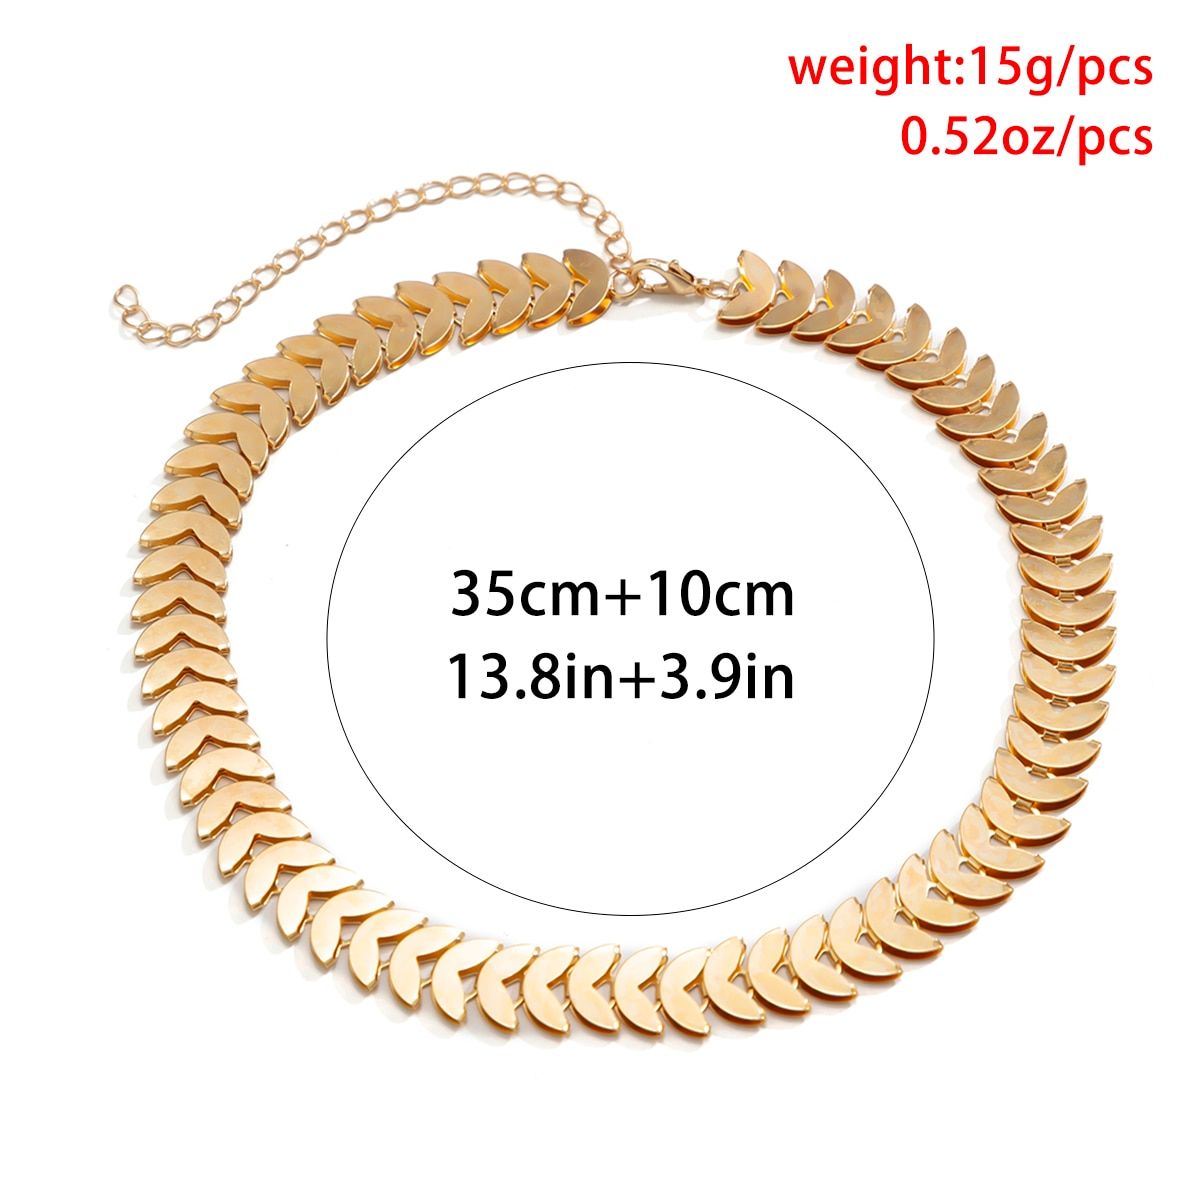 Gold Petal Choker Necklace for Women with overlapping leaf design, displayed on white background with dimensions and weight noted, highlighting its new fashion style.